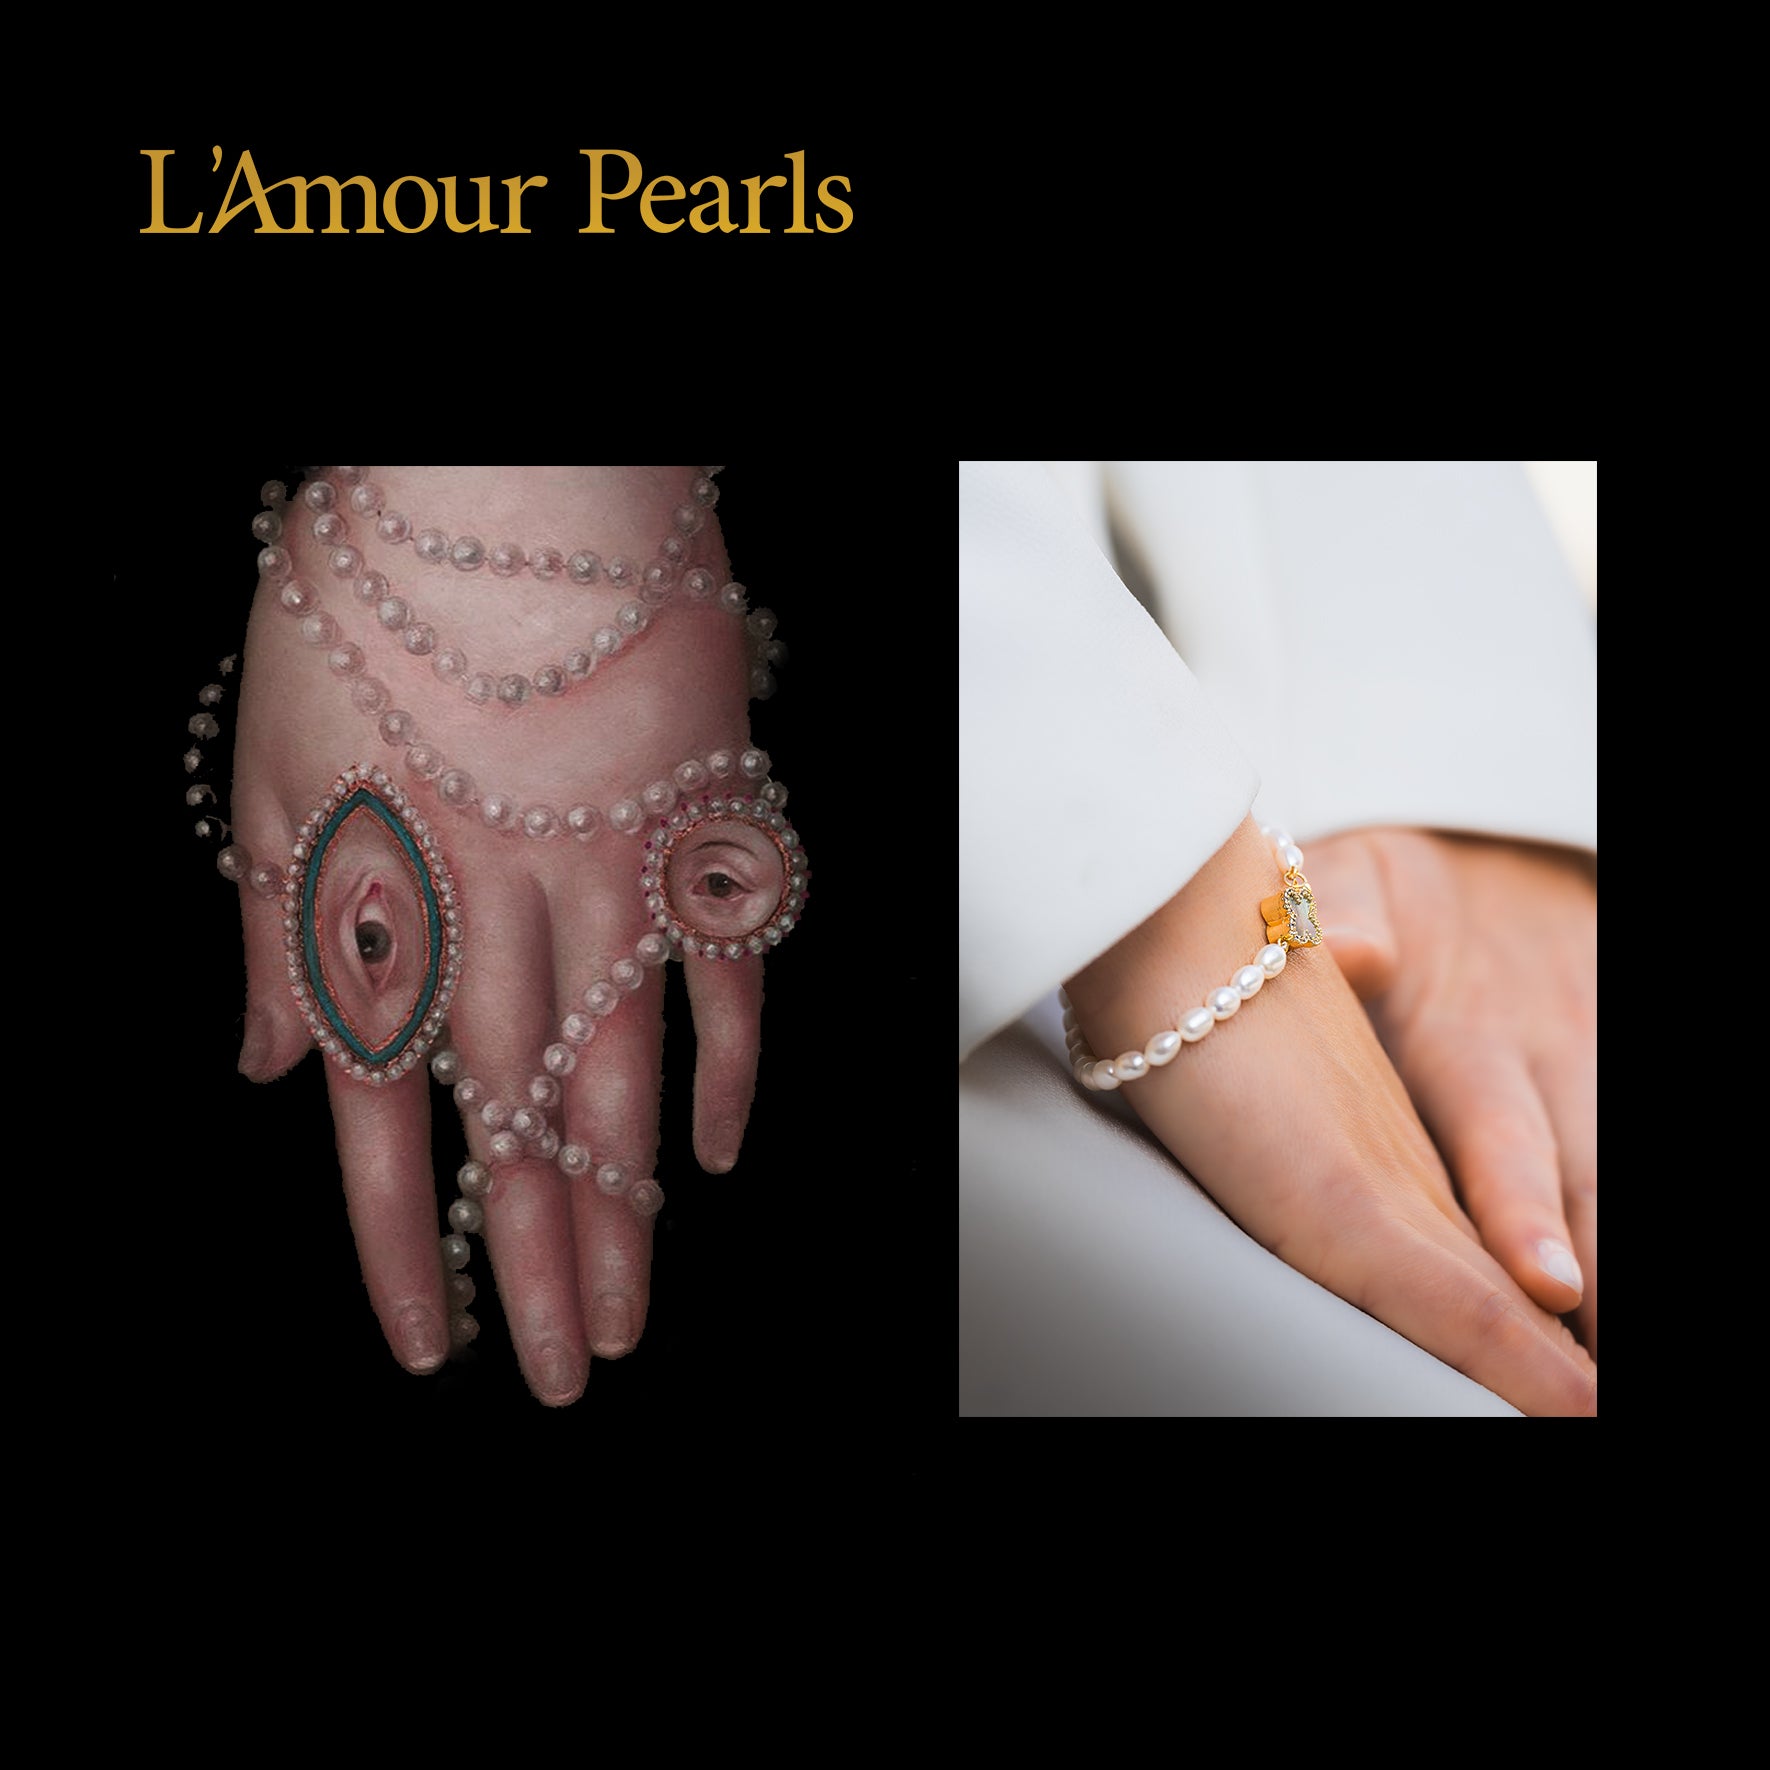 The Enduring Allure of Pearls: From the Renaissance Era to Present Day